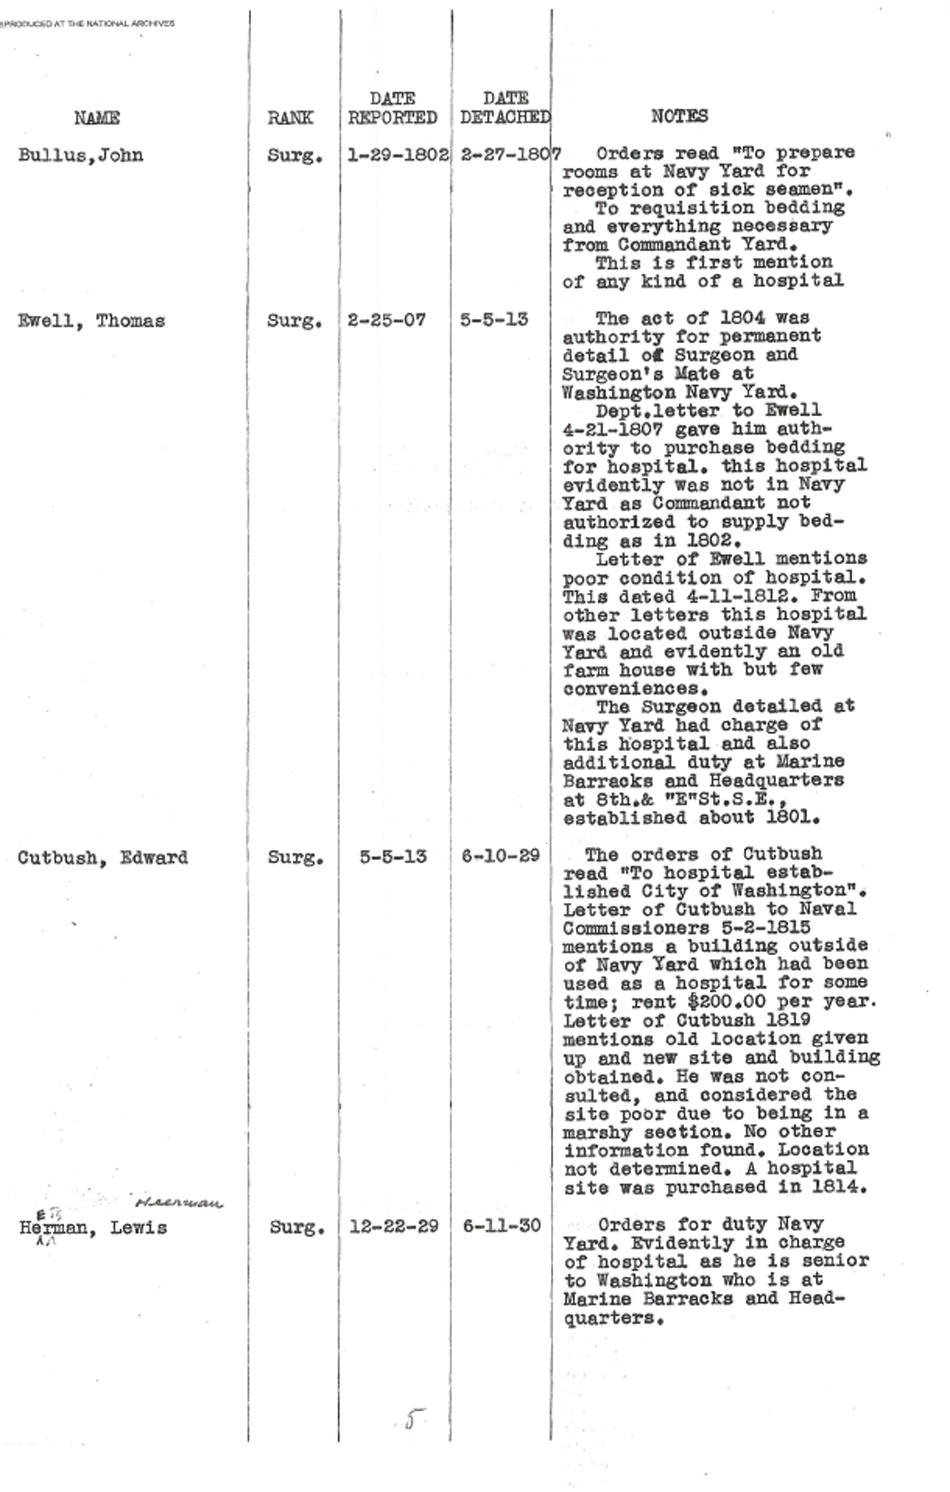 Roster of Commanding Officers of the Naval Hospital, Washington, DC, Page 5